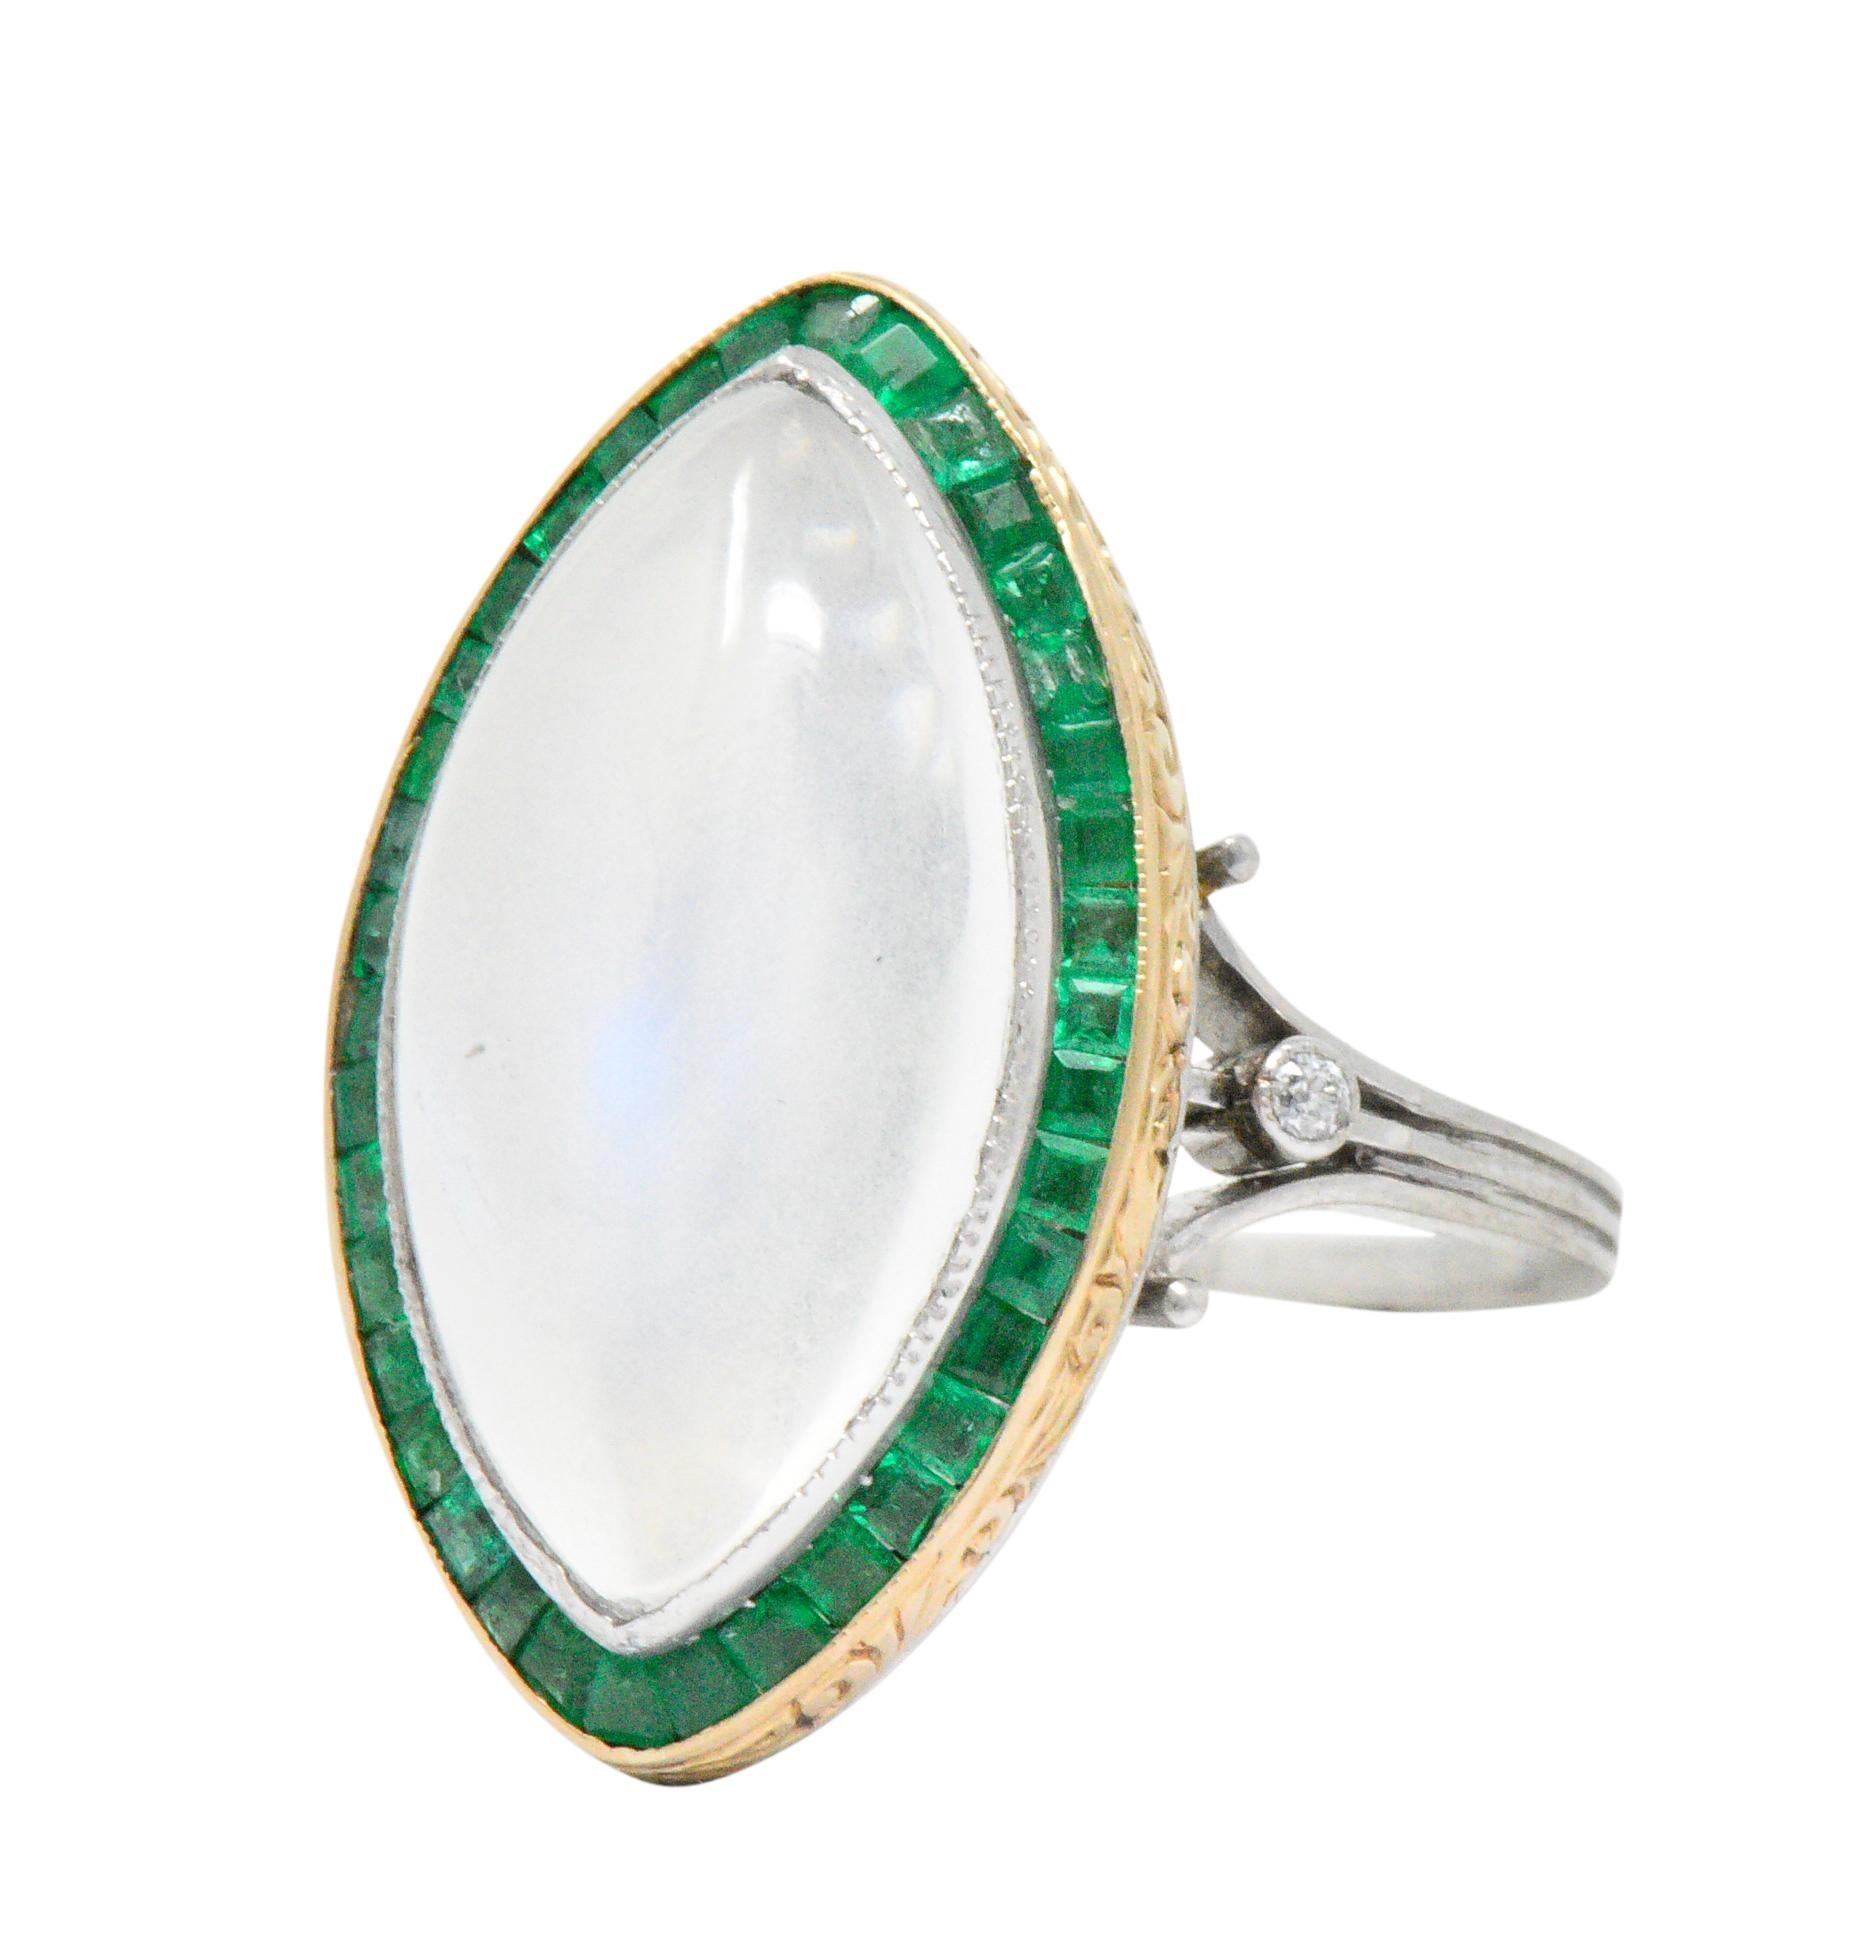 Substantial navette shaped ring centering a moonstone cabochon measuring approximately 20.0 x 10.5 mm

Translucent white in body color with stunning billowing blue adularescence, bezel set in milgrain platinum 

With bright green calibré cut emerald